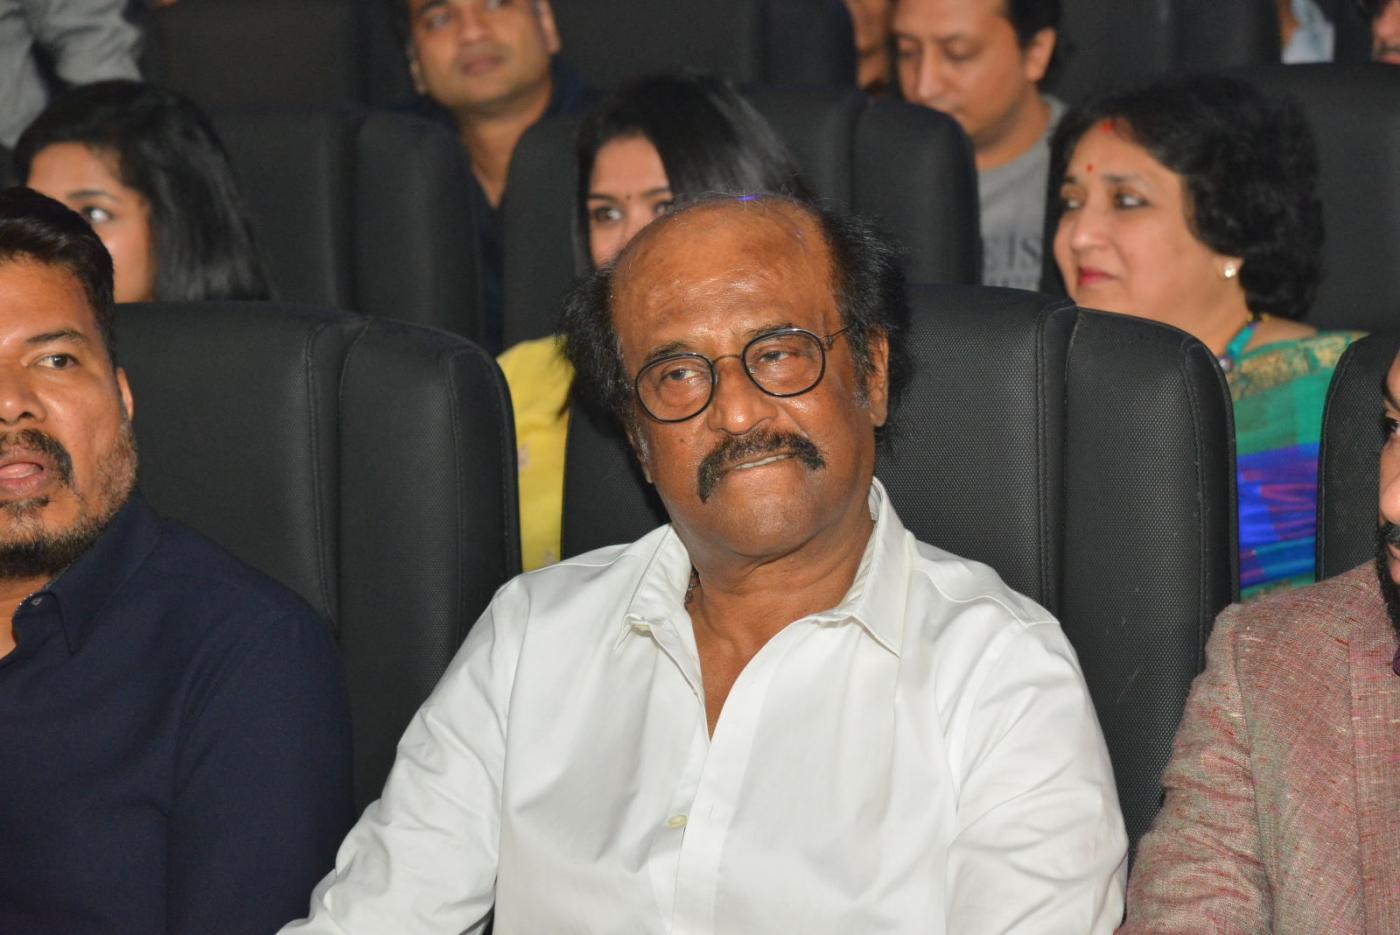 Chennai: Actor Rajinikanth at the trailer launch of his upcoming film " 2.0" in Chennai on Nov 3, 2018. (Photo: IANS) by .